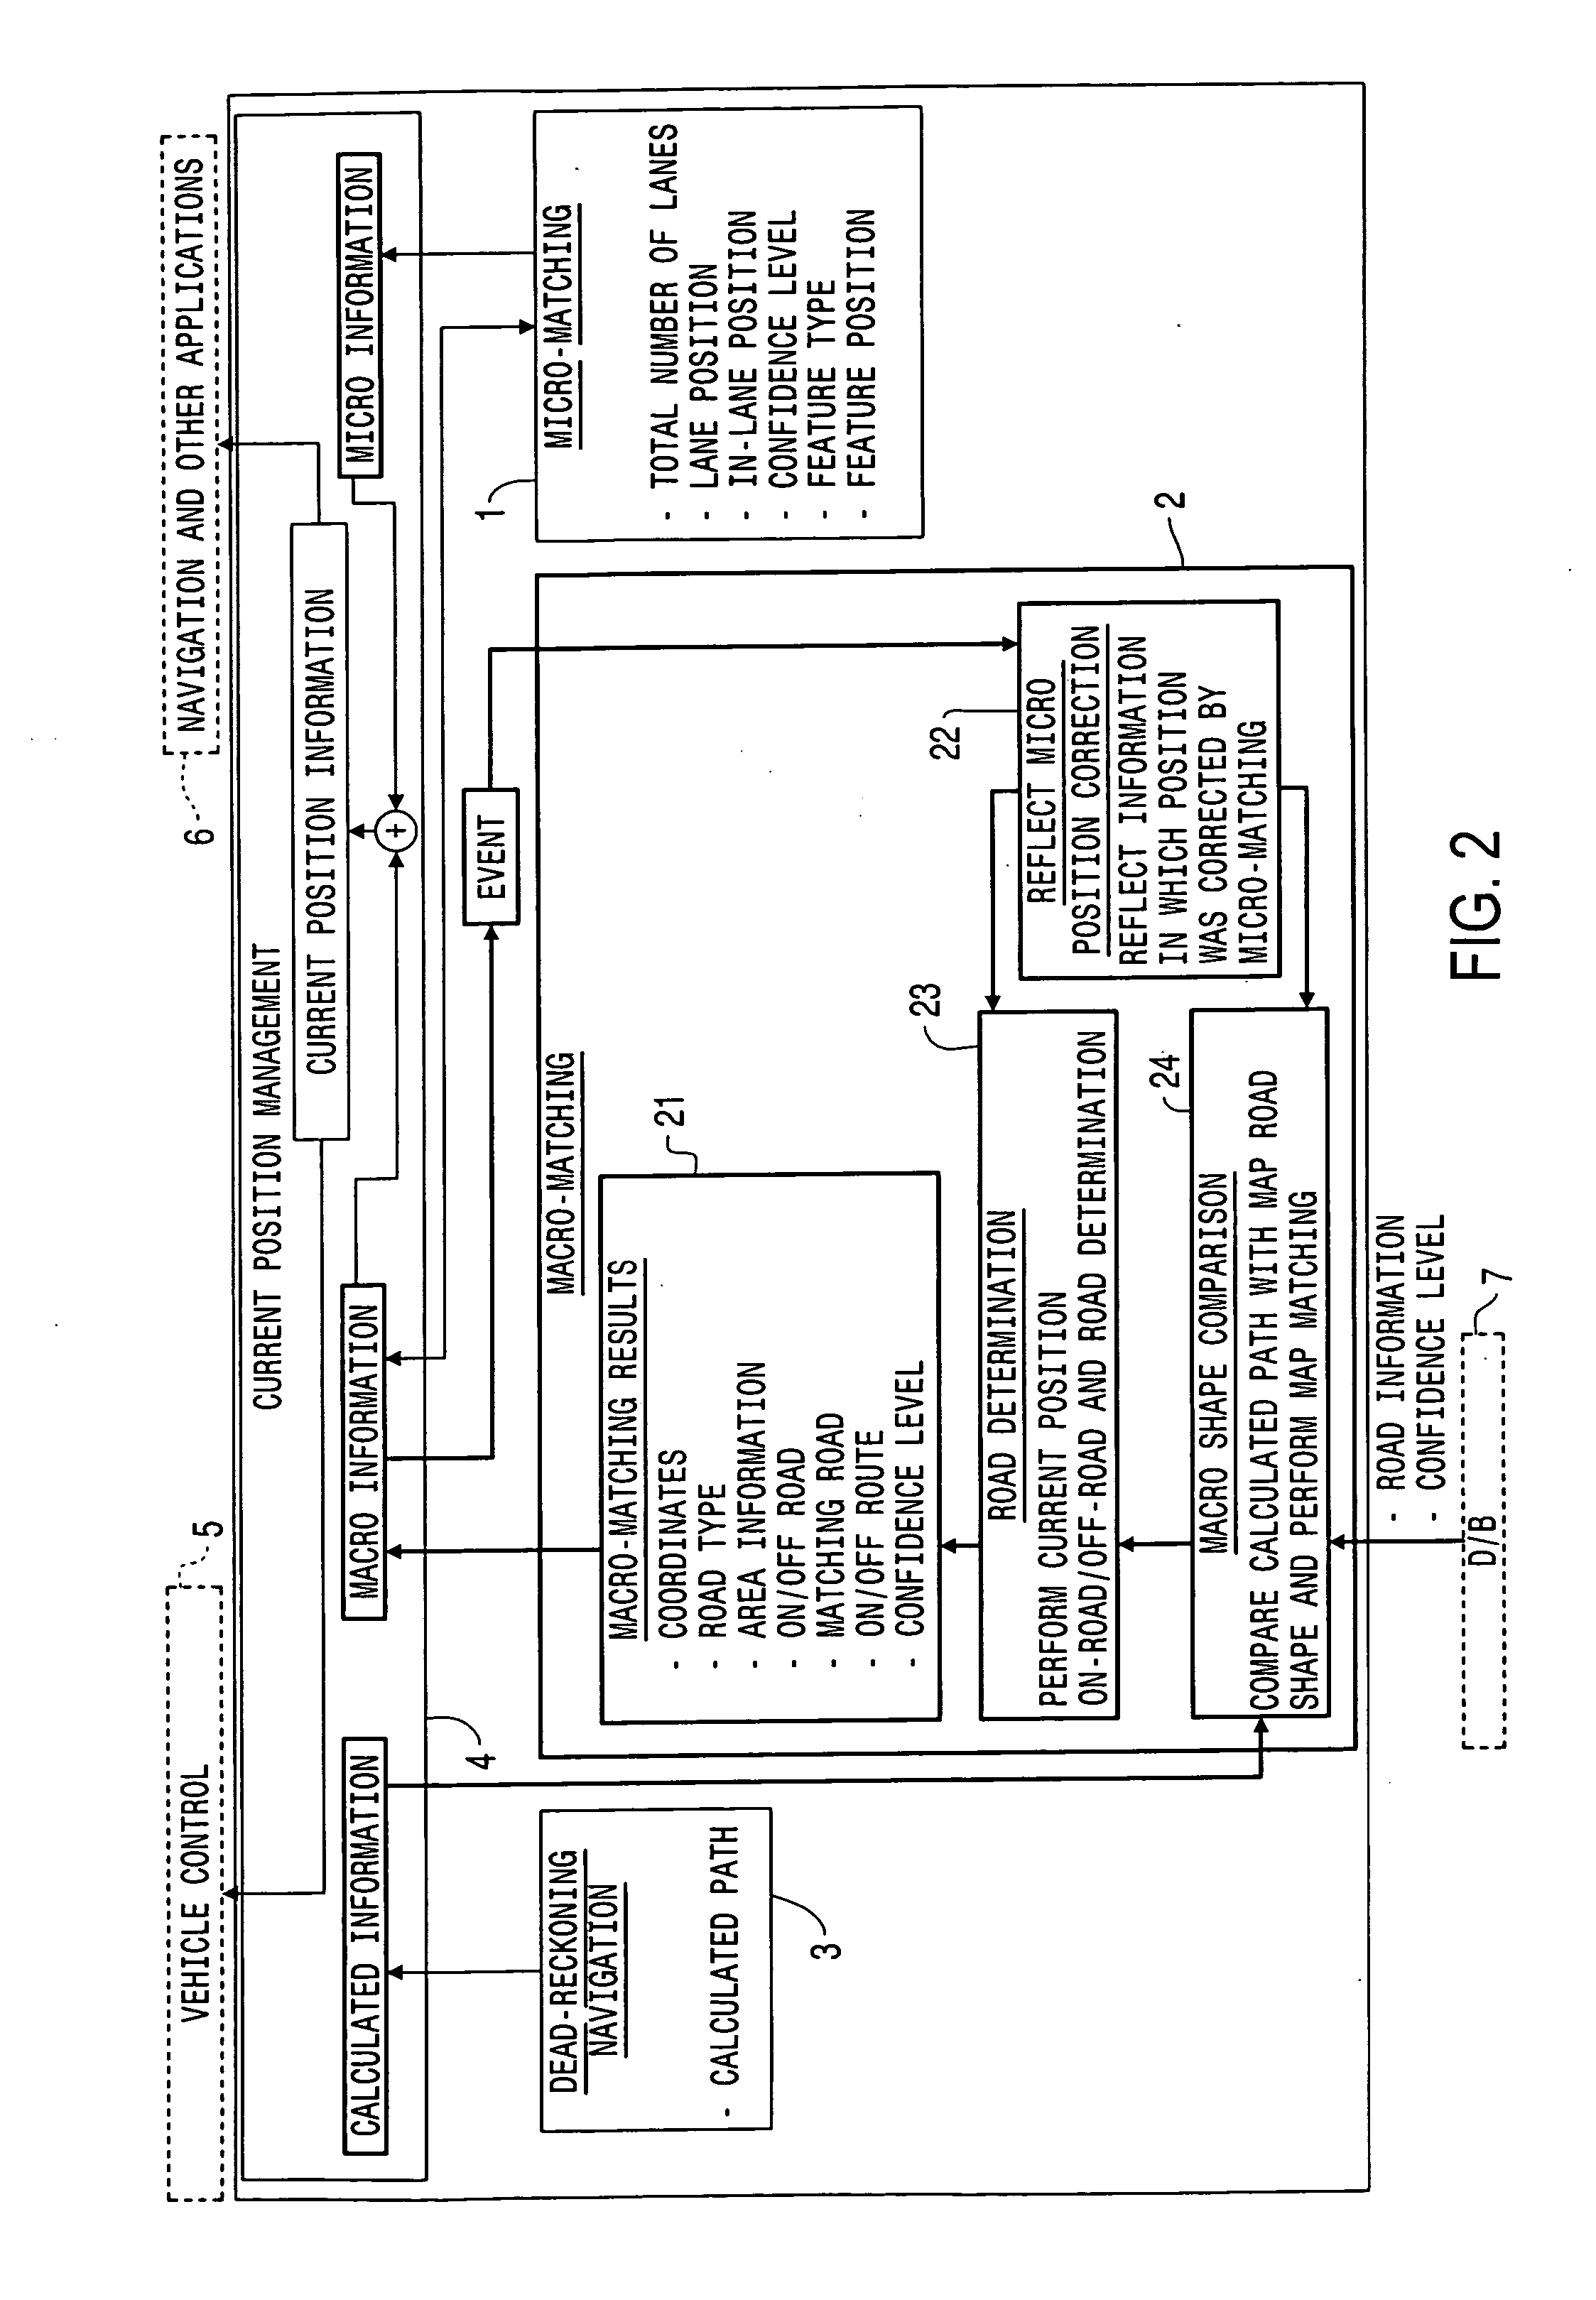 Current position information management systems, methods, and programs